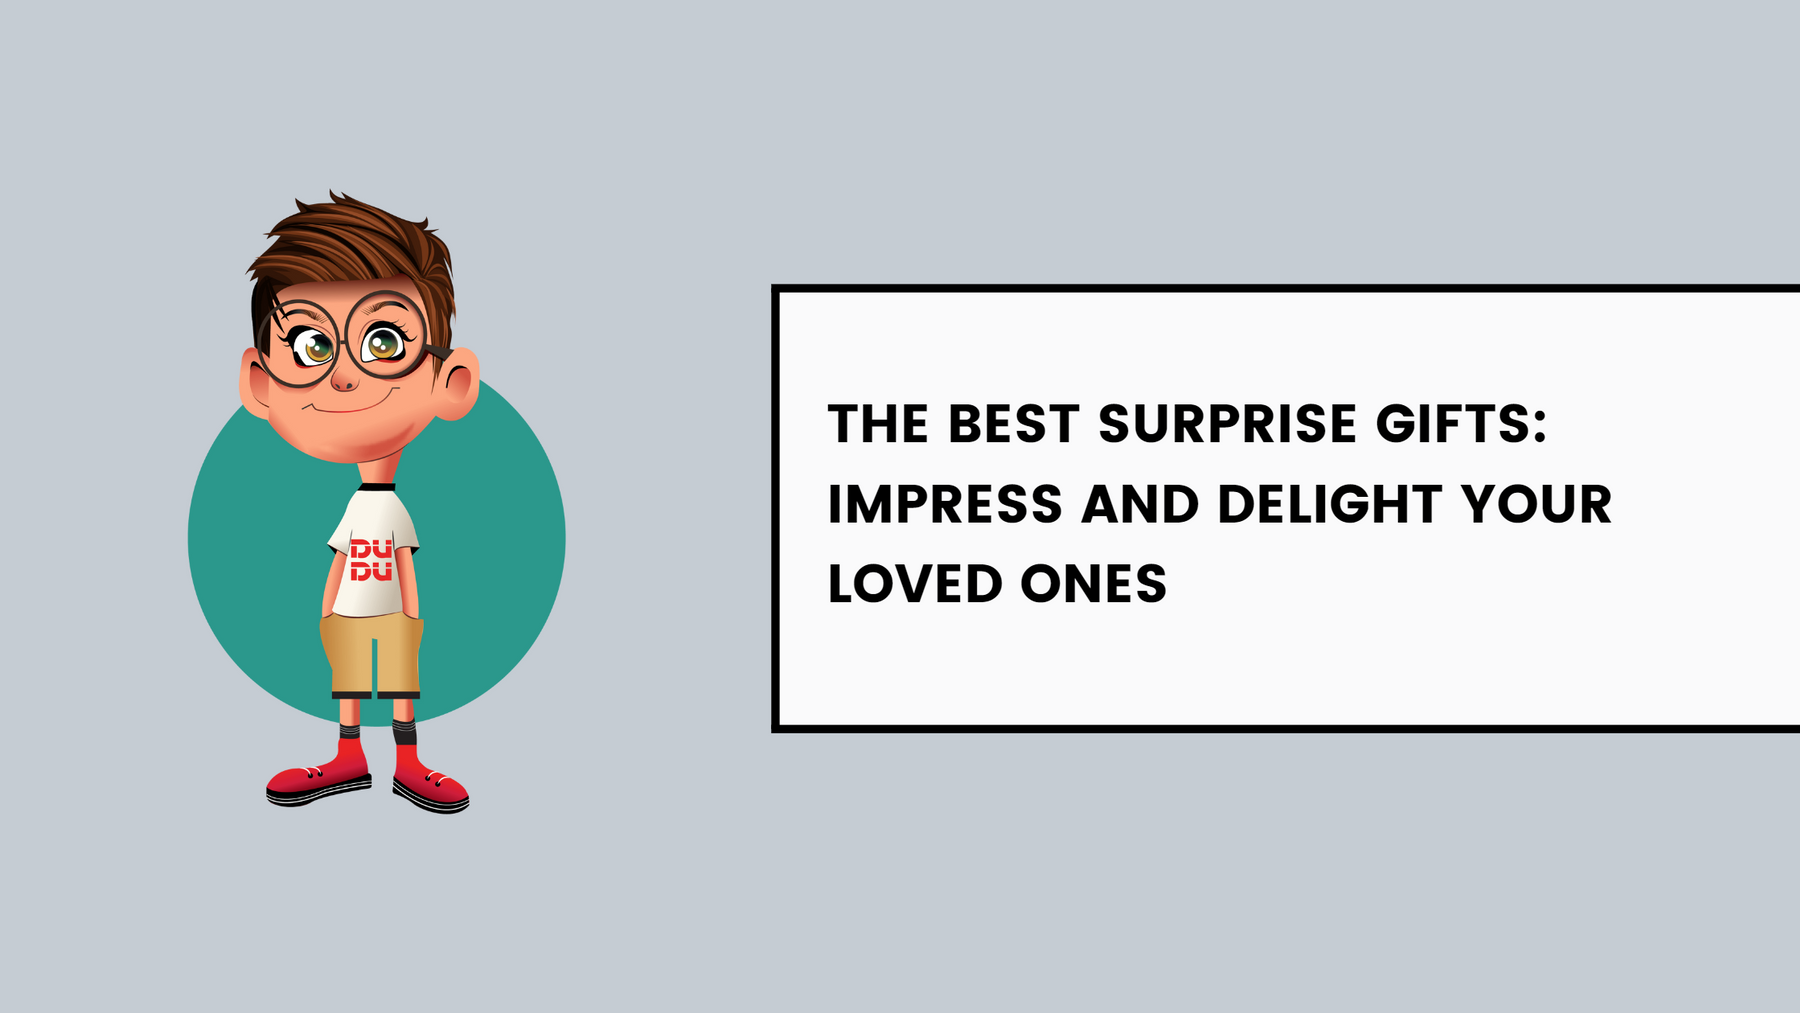 The Best Surprise Gifts: Impress And Delight Your Loved Ones